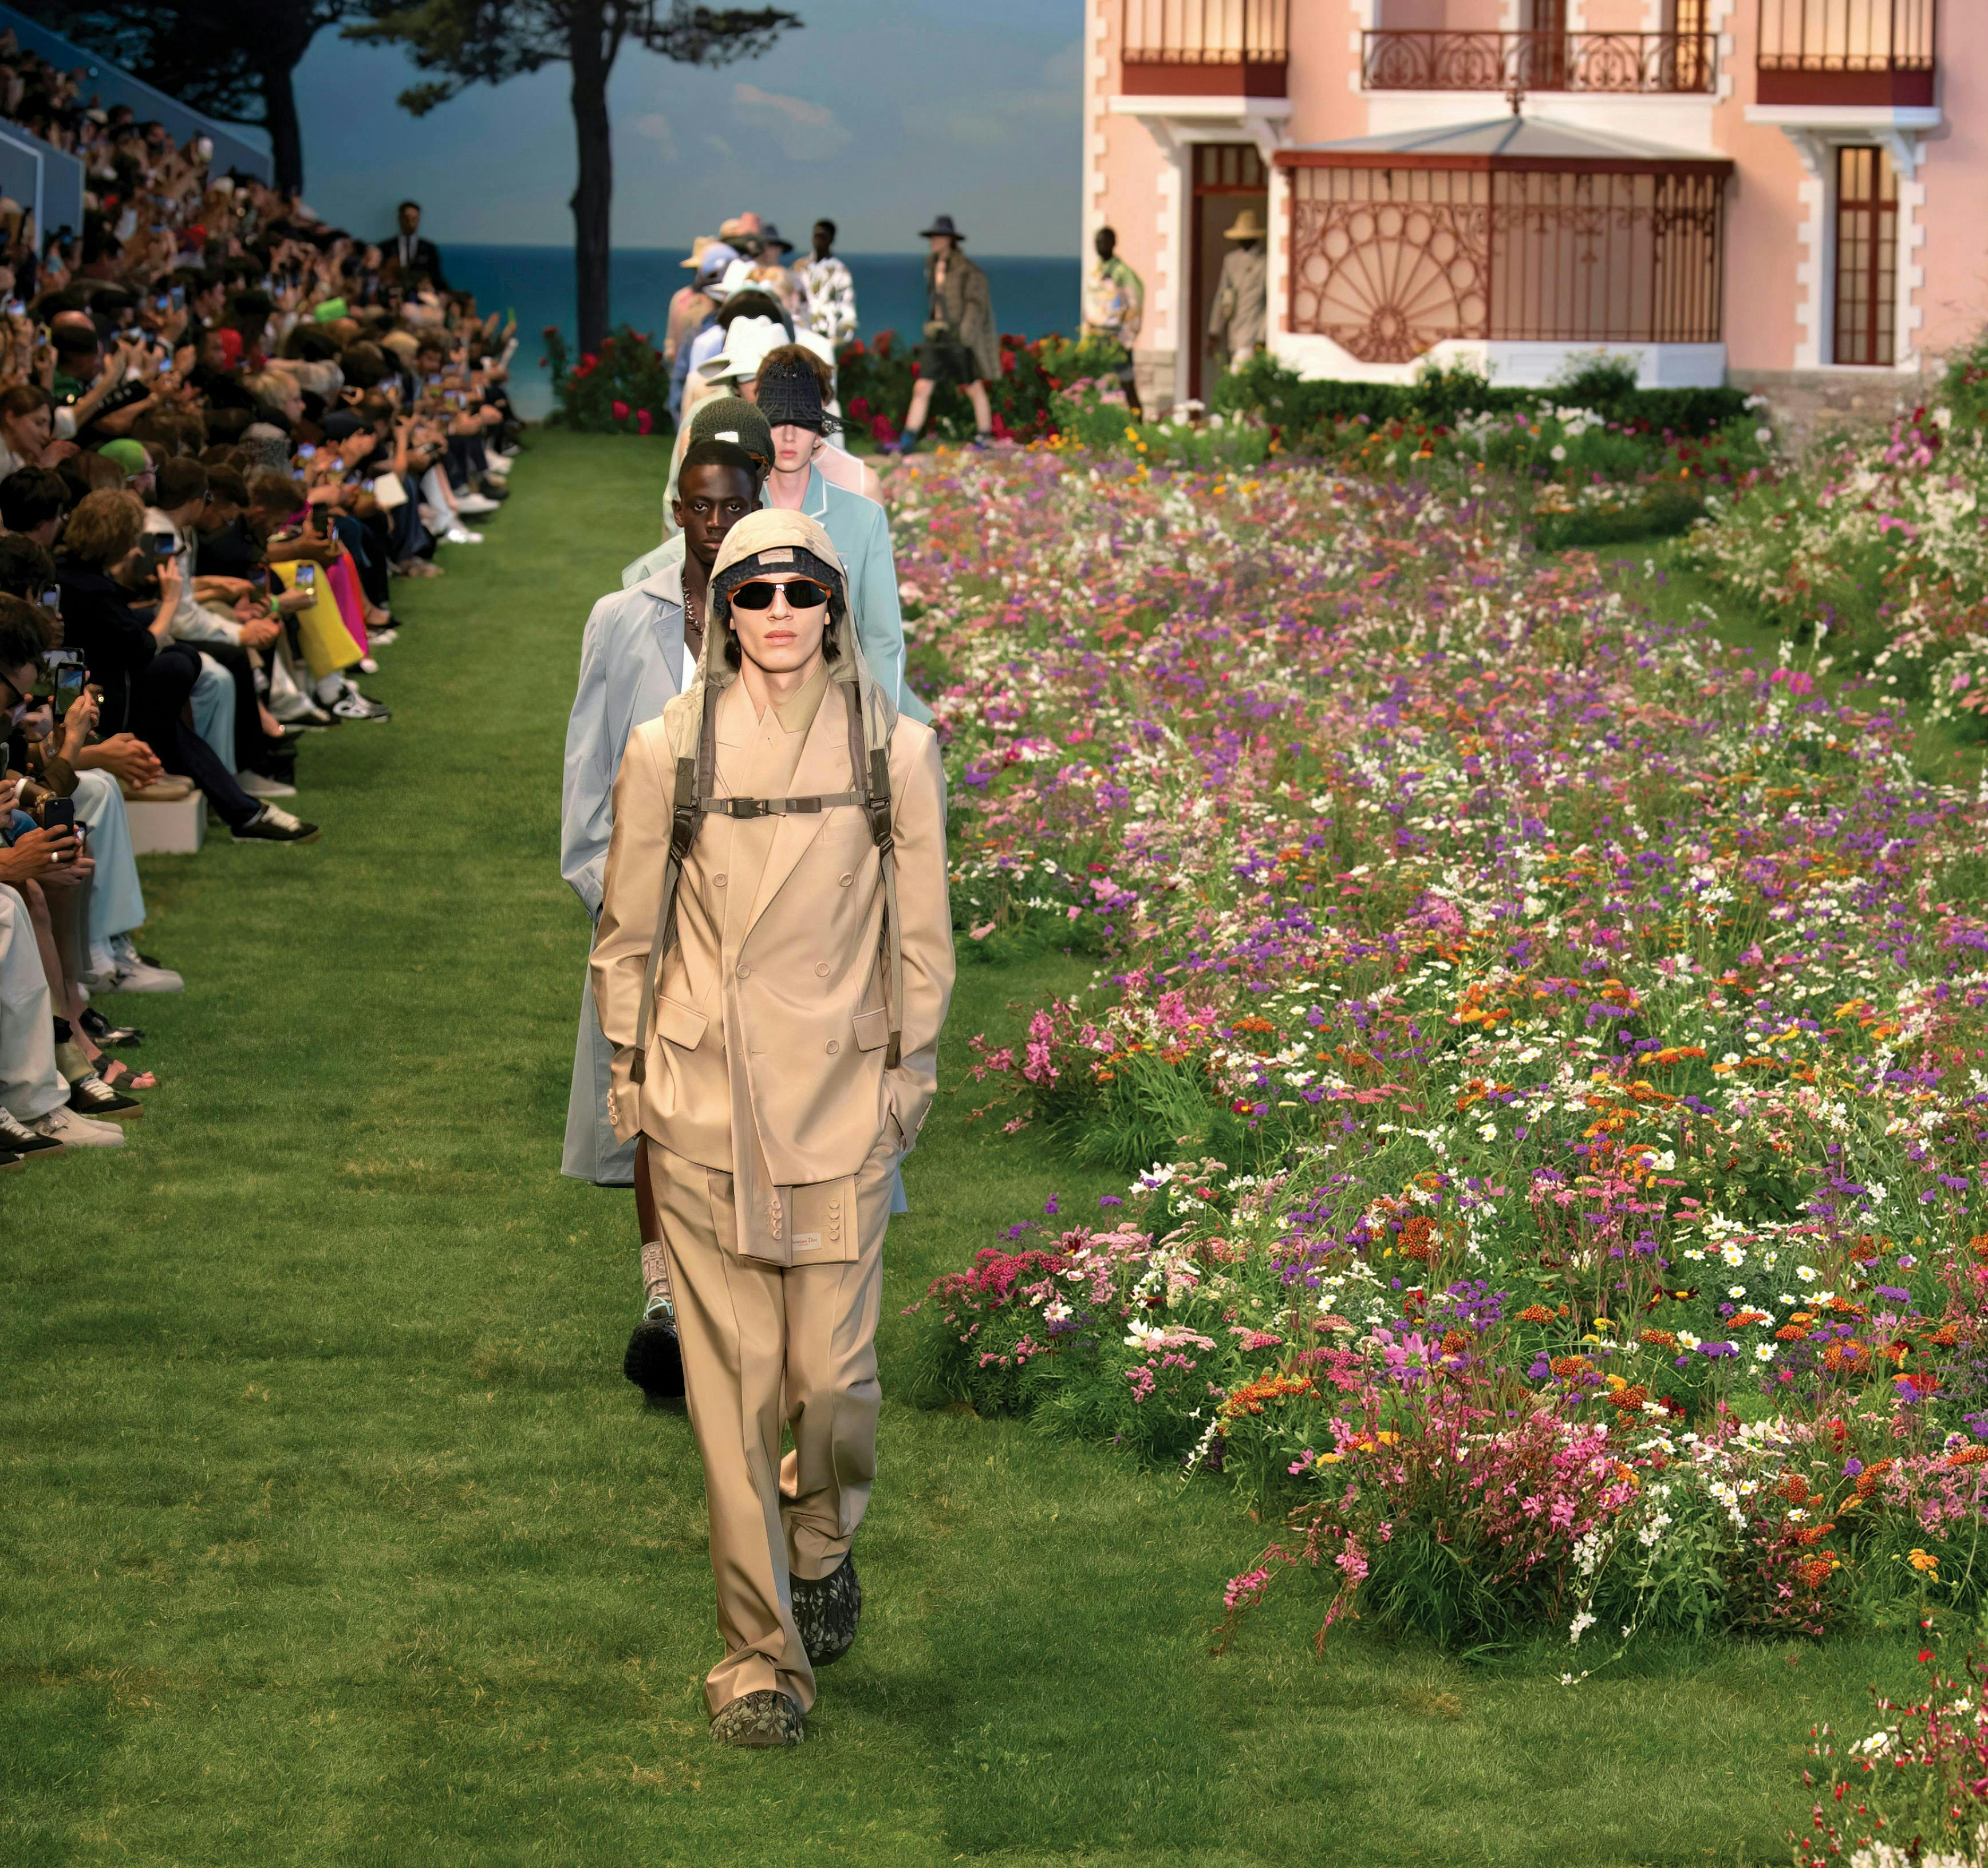 Dior Men's Collection runway on green grass.